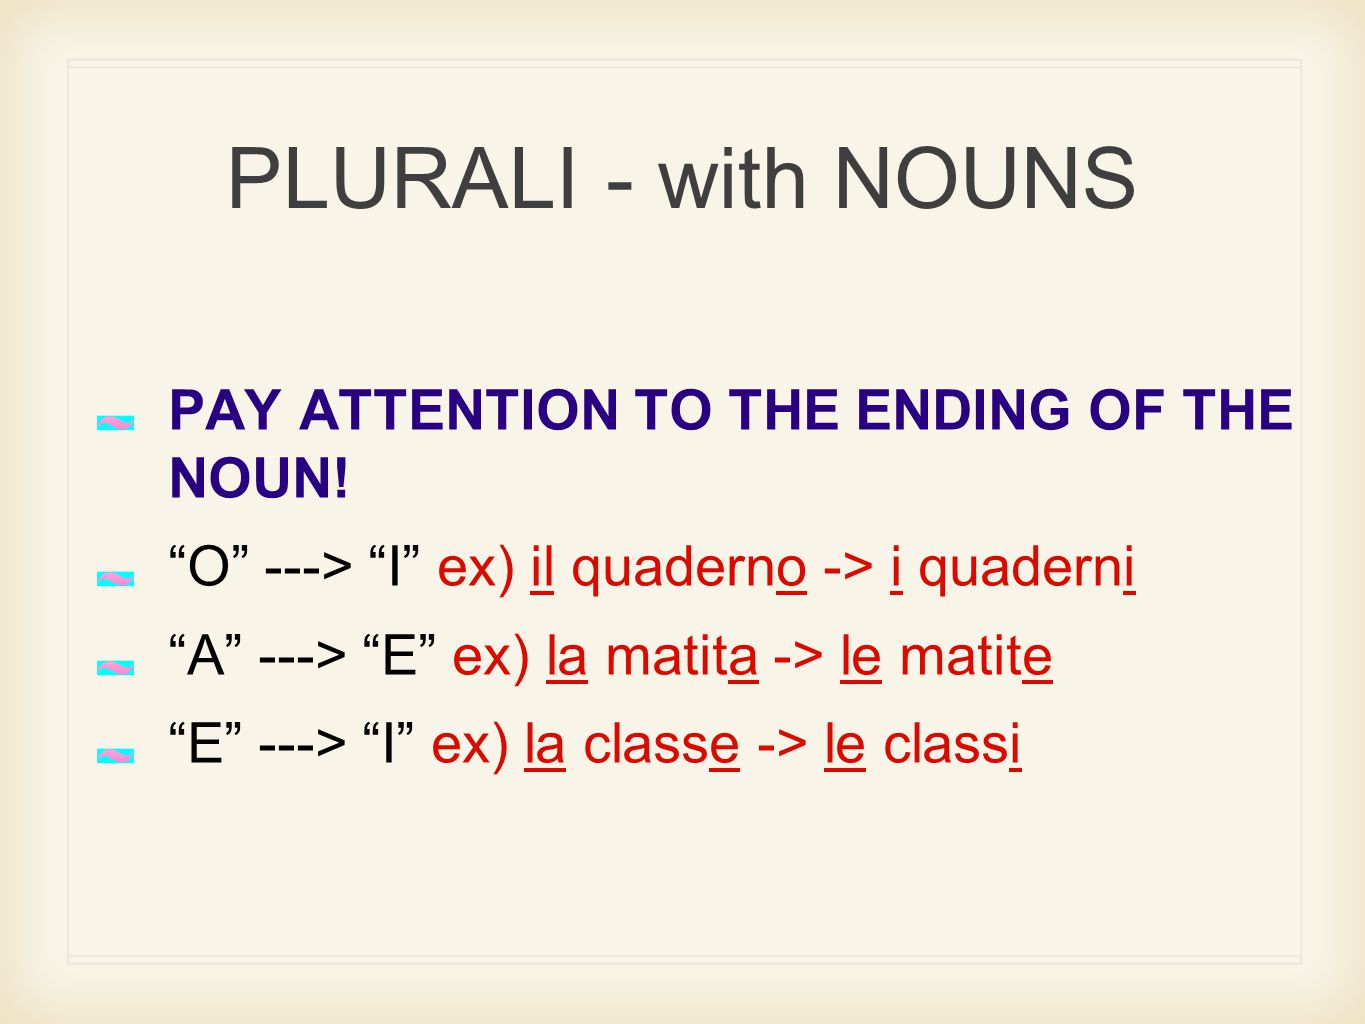 PLURALI - with NOUNS PAY ATTENTION TO THE ENDING OF THE NOUN.